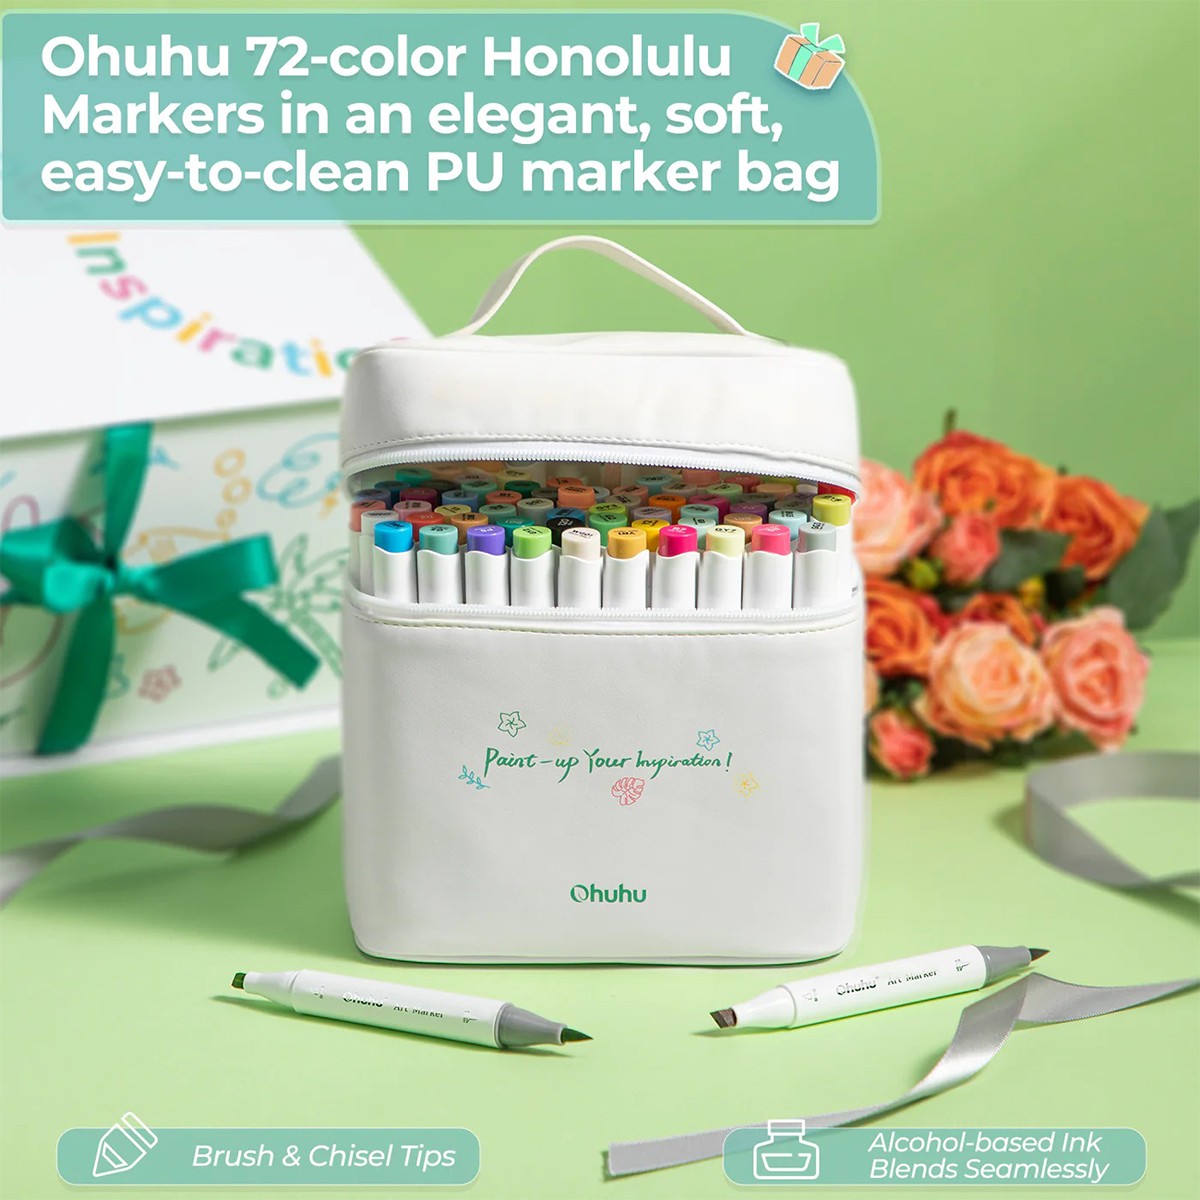 Ohuhu Gift Box Σετ Ζωγραφικής All-in-one 72 Μαρκαδόρων